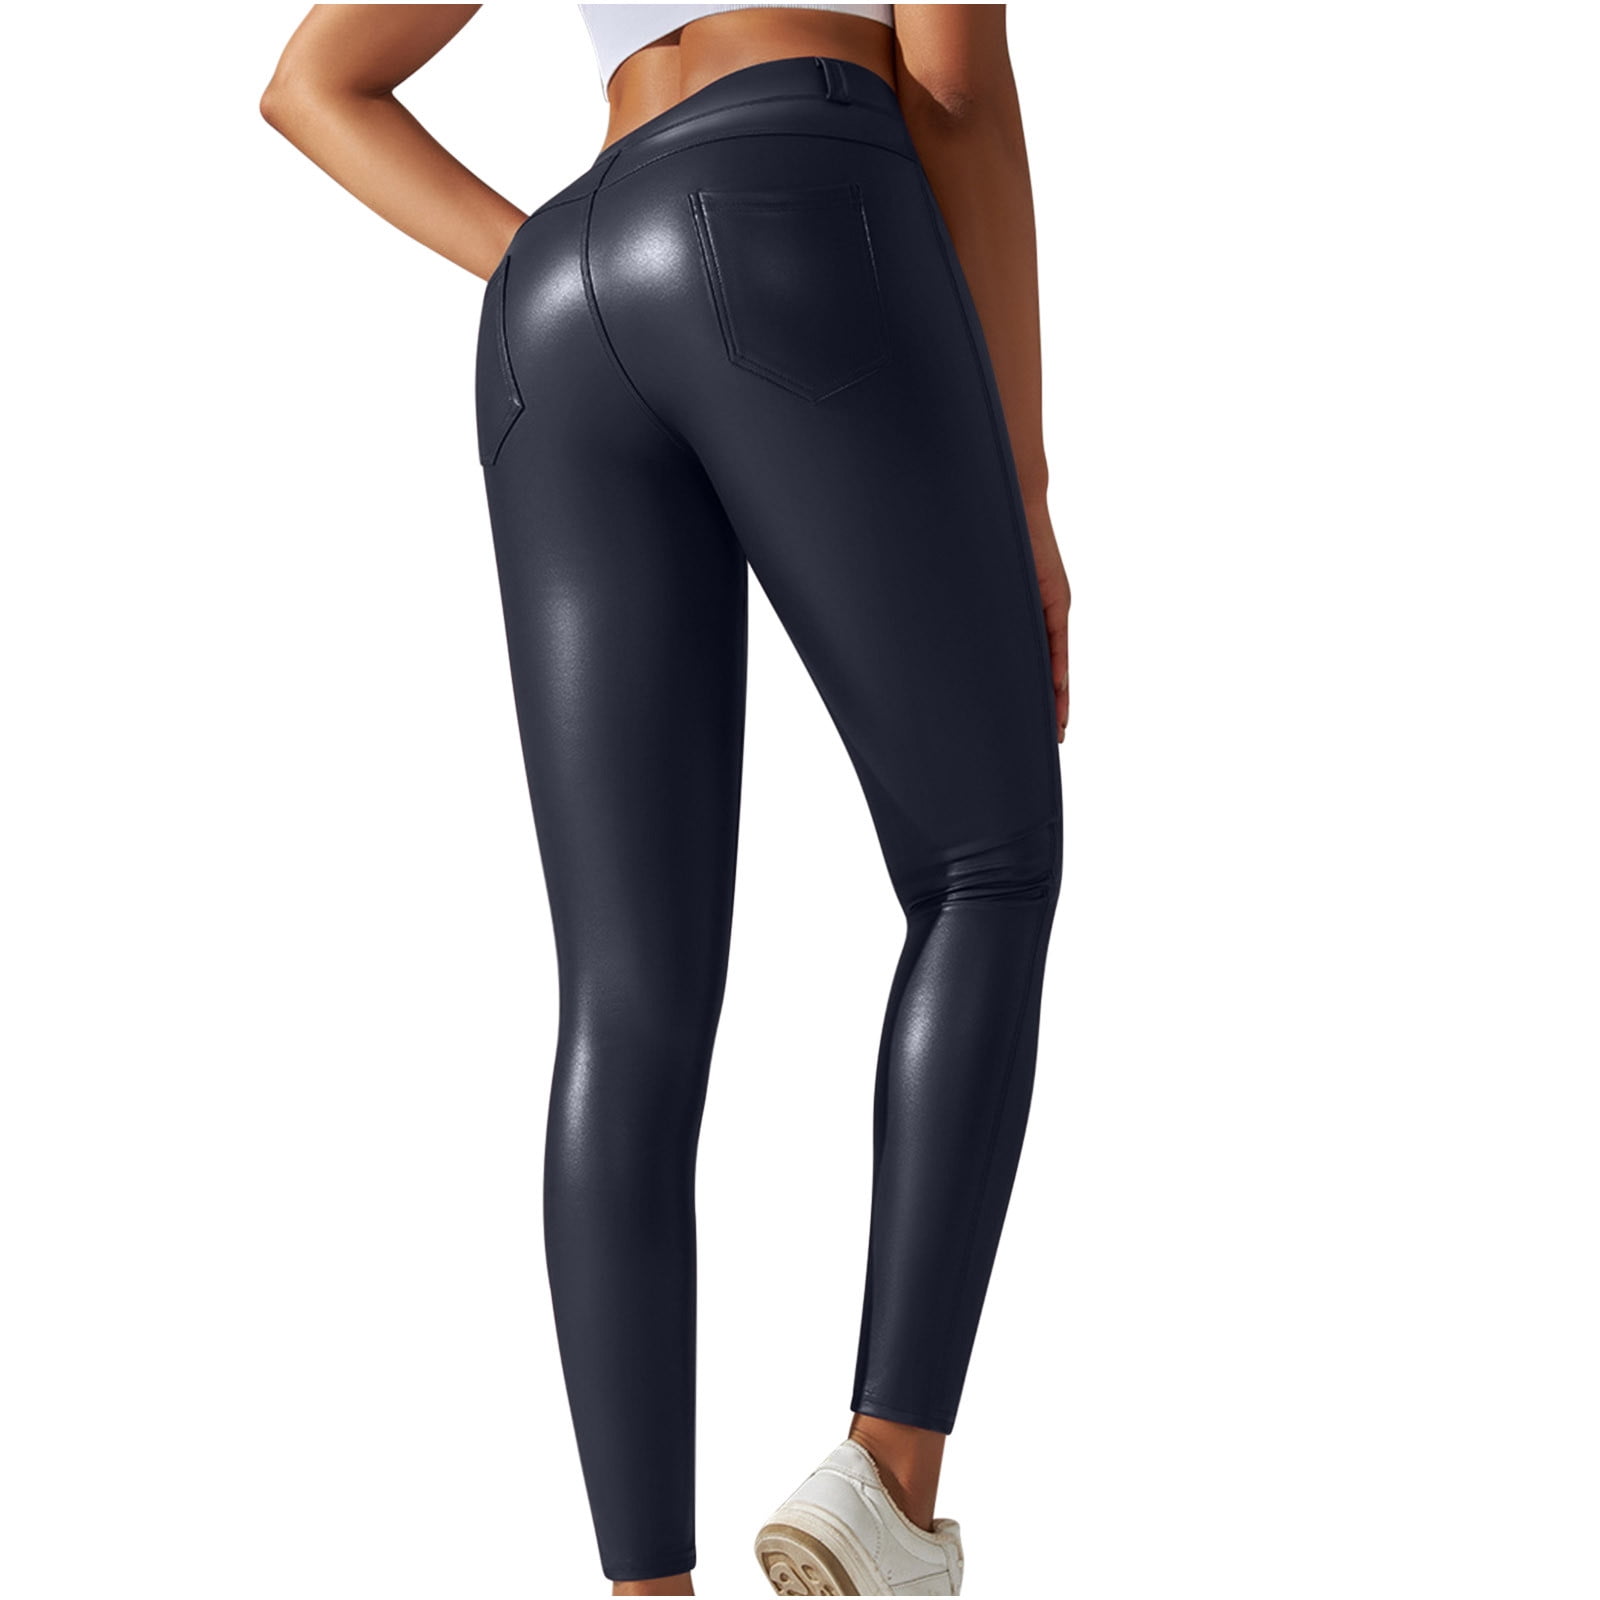 SMihono Skinny Slim Women's Sexy Leggings Plus Size Color Bottom Small Feet  Sports High Waist Thin Leather Pants Full Length Athletic Sports Pants for Teen  Girls Love Navy 4 